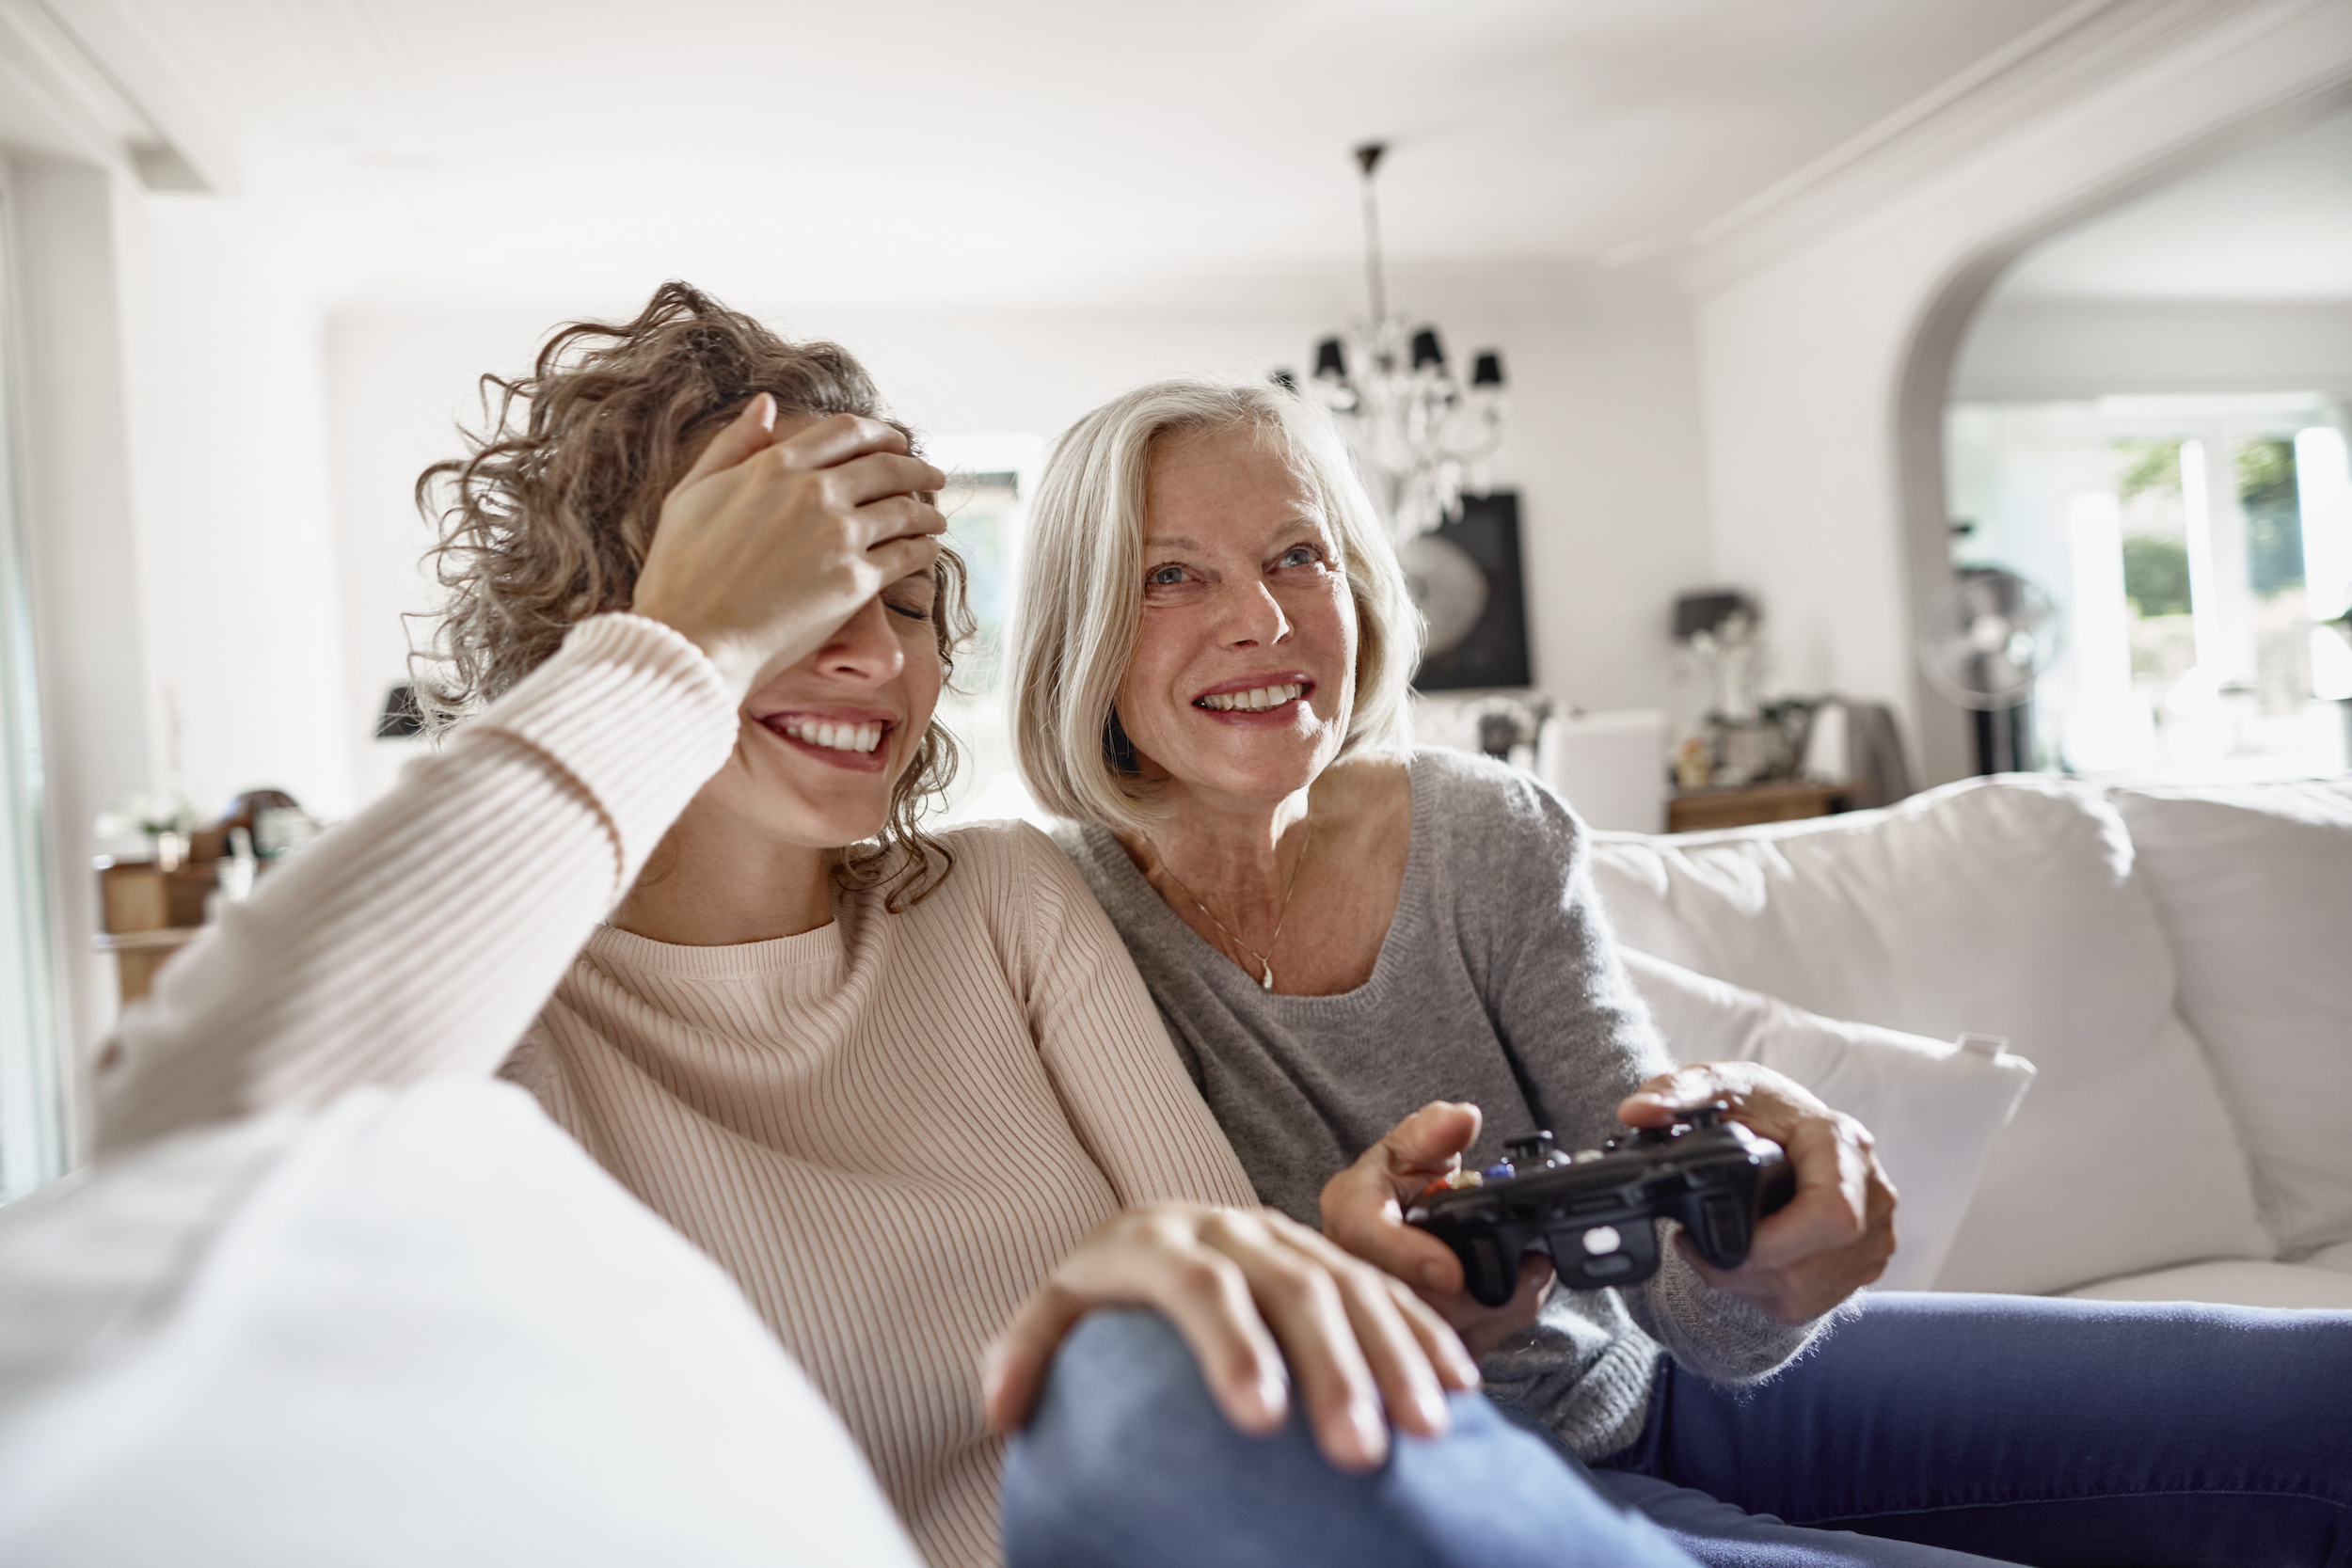 Two women laughing and playing a video game